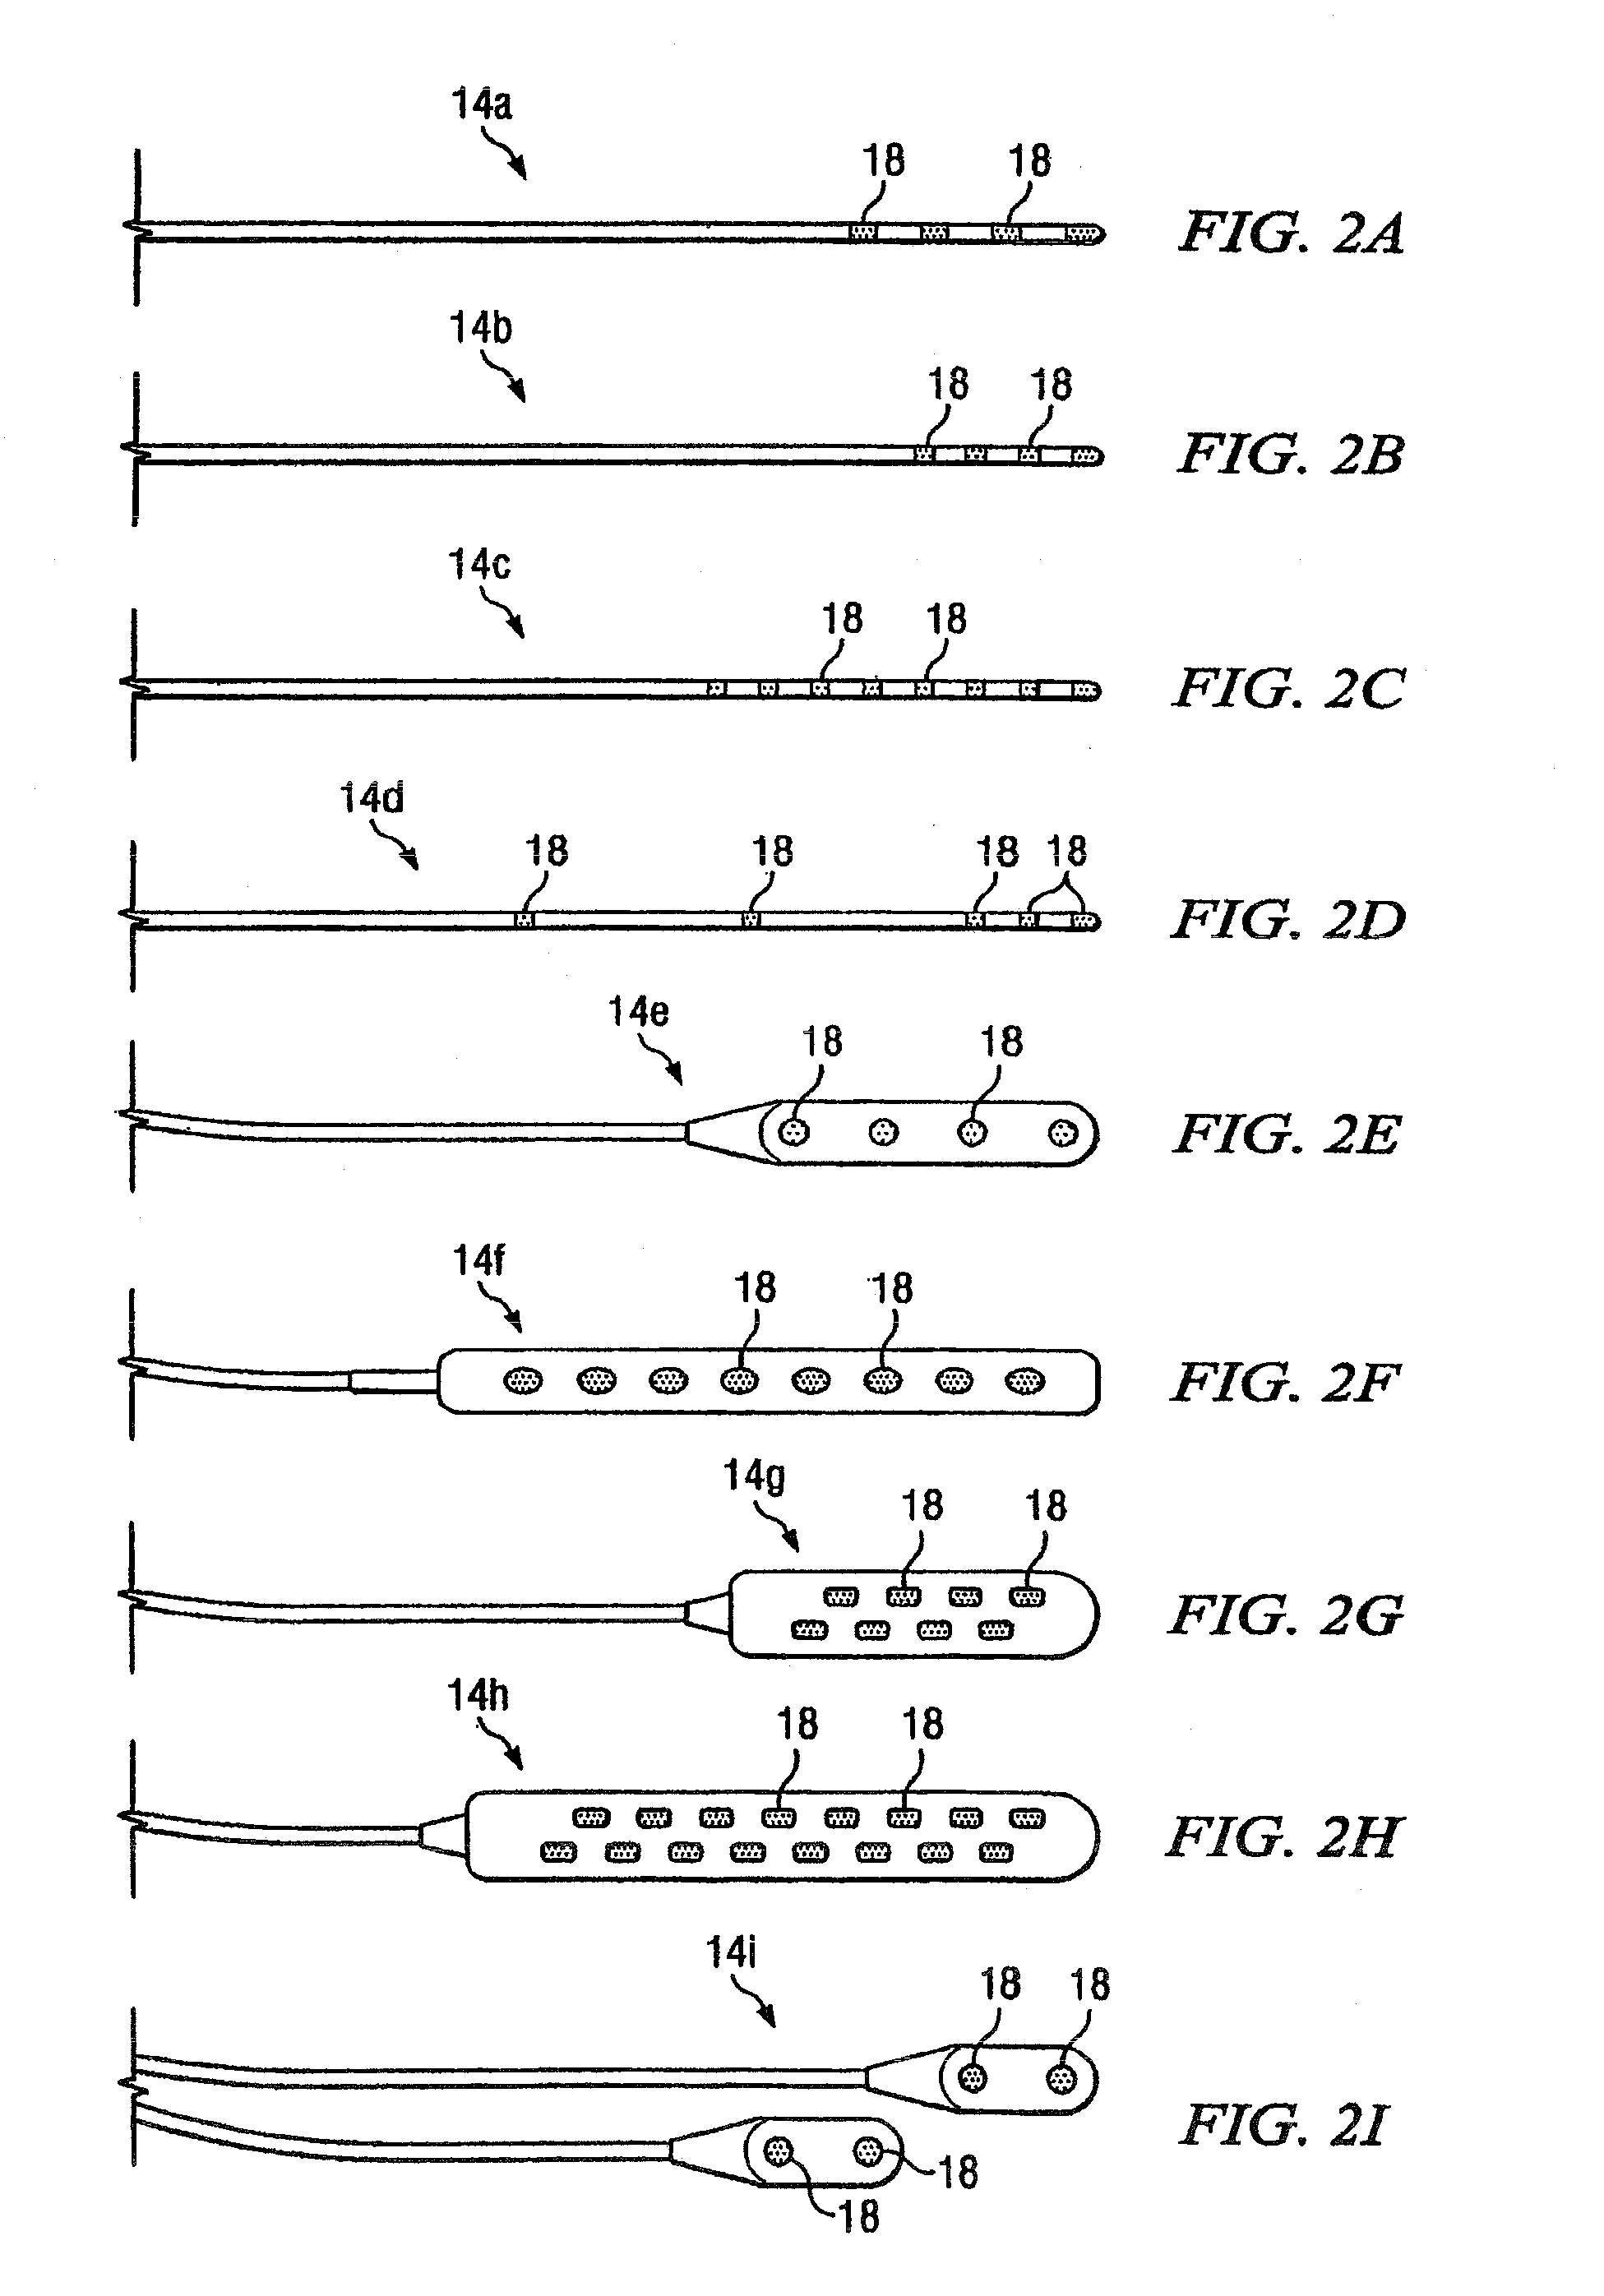 Electrical stimulation system and method for stimulating tissue in the brain to treat a neurological condition